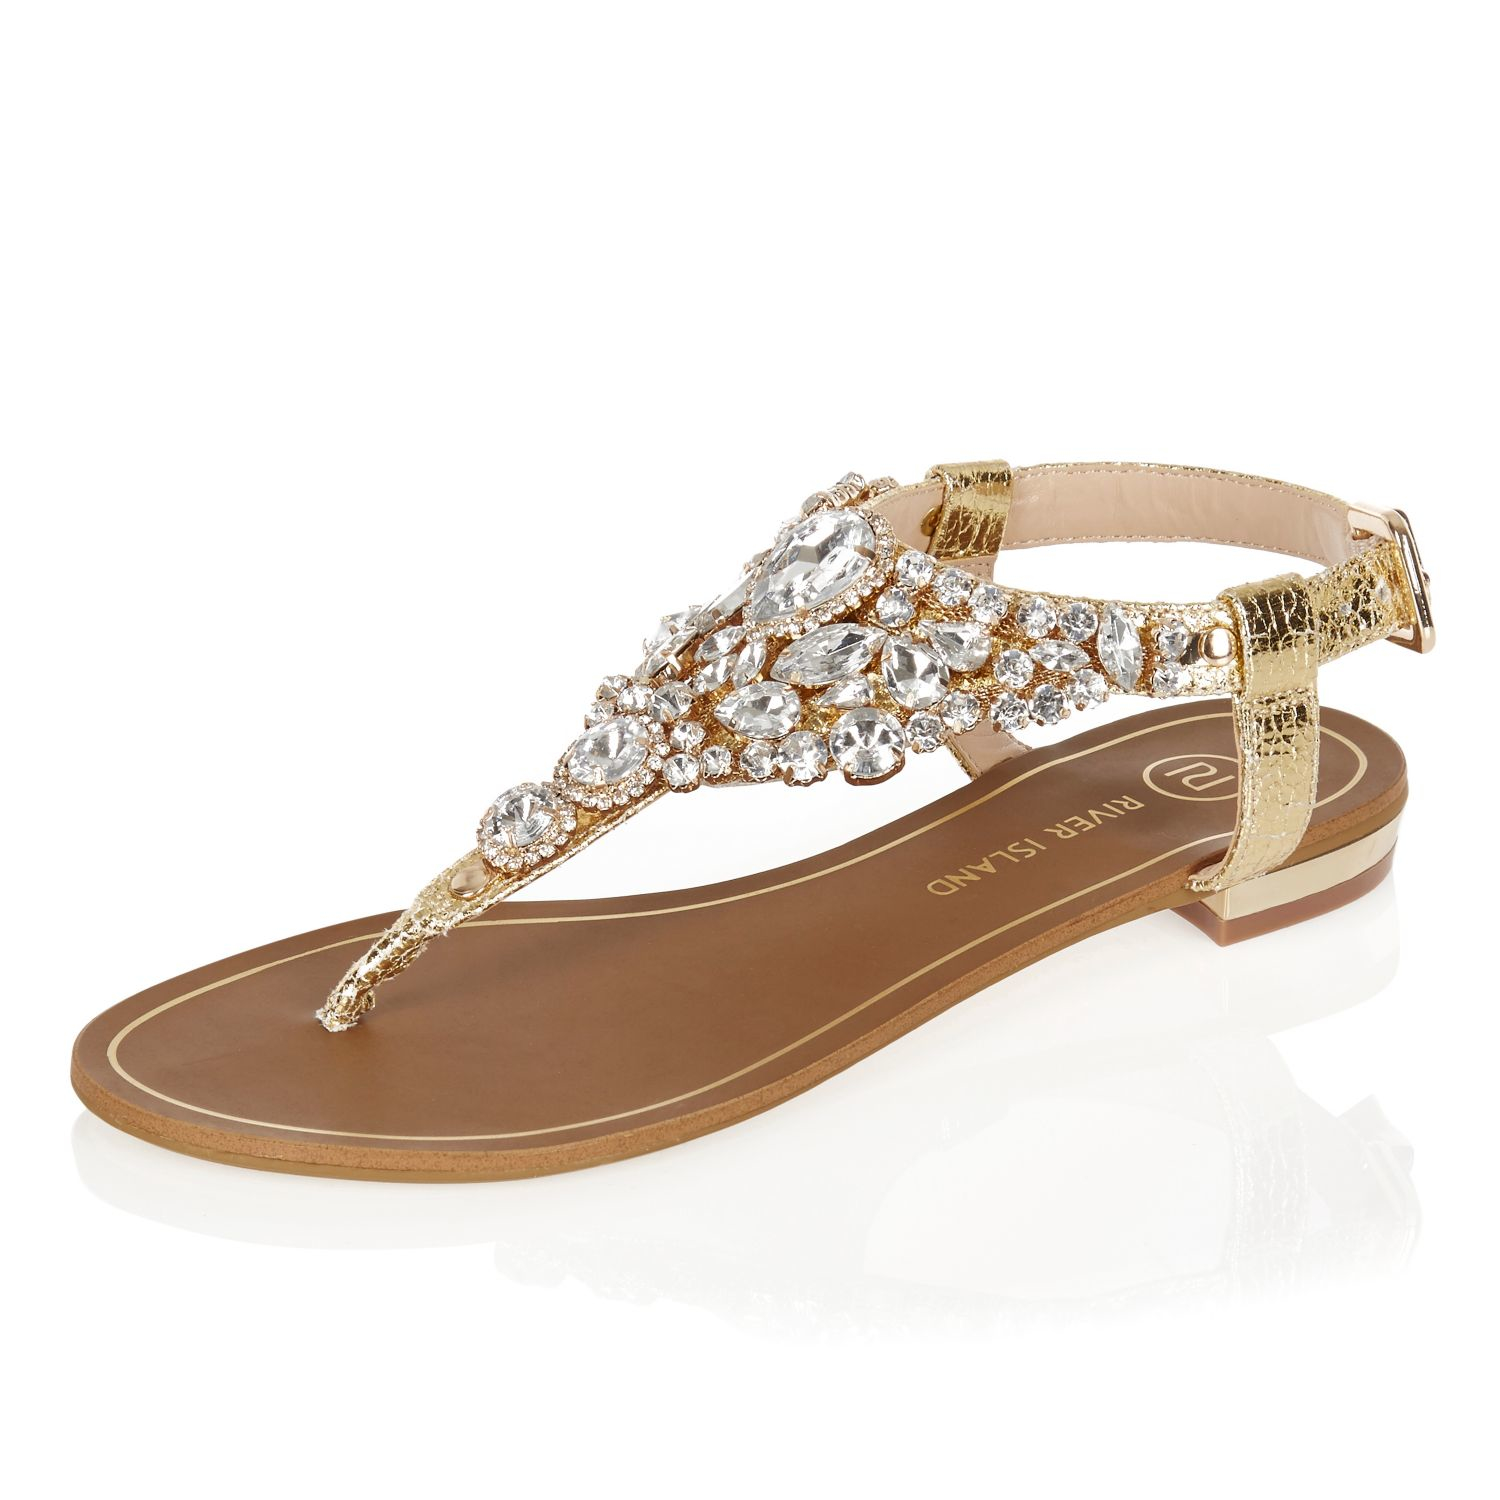 River Island Gold Metallic Embellished Sandals in Brown - Lyst